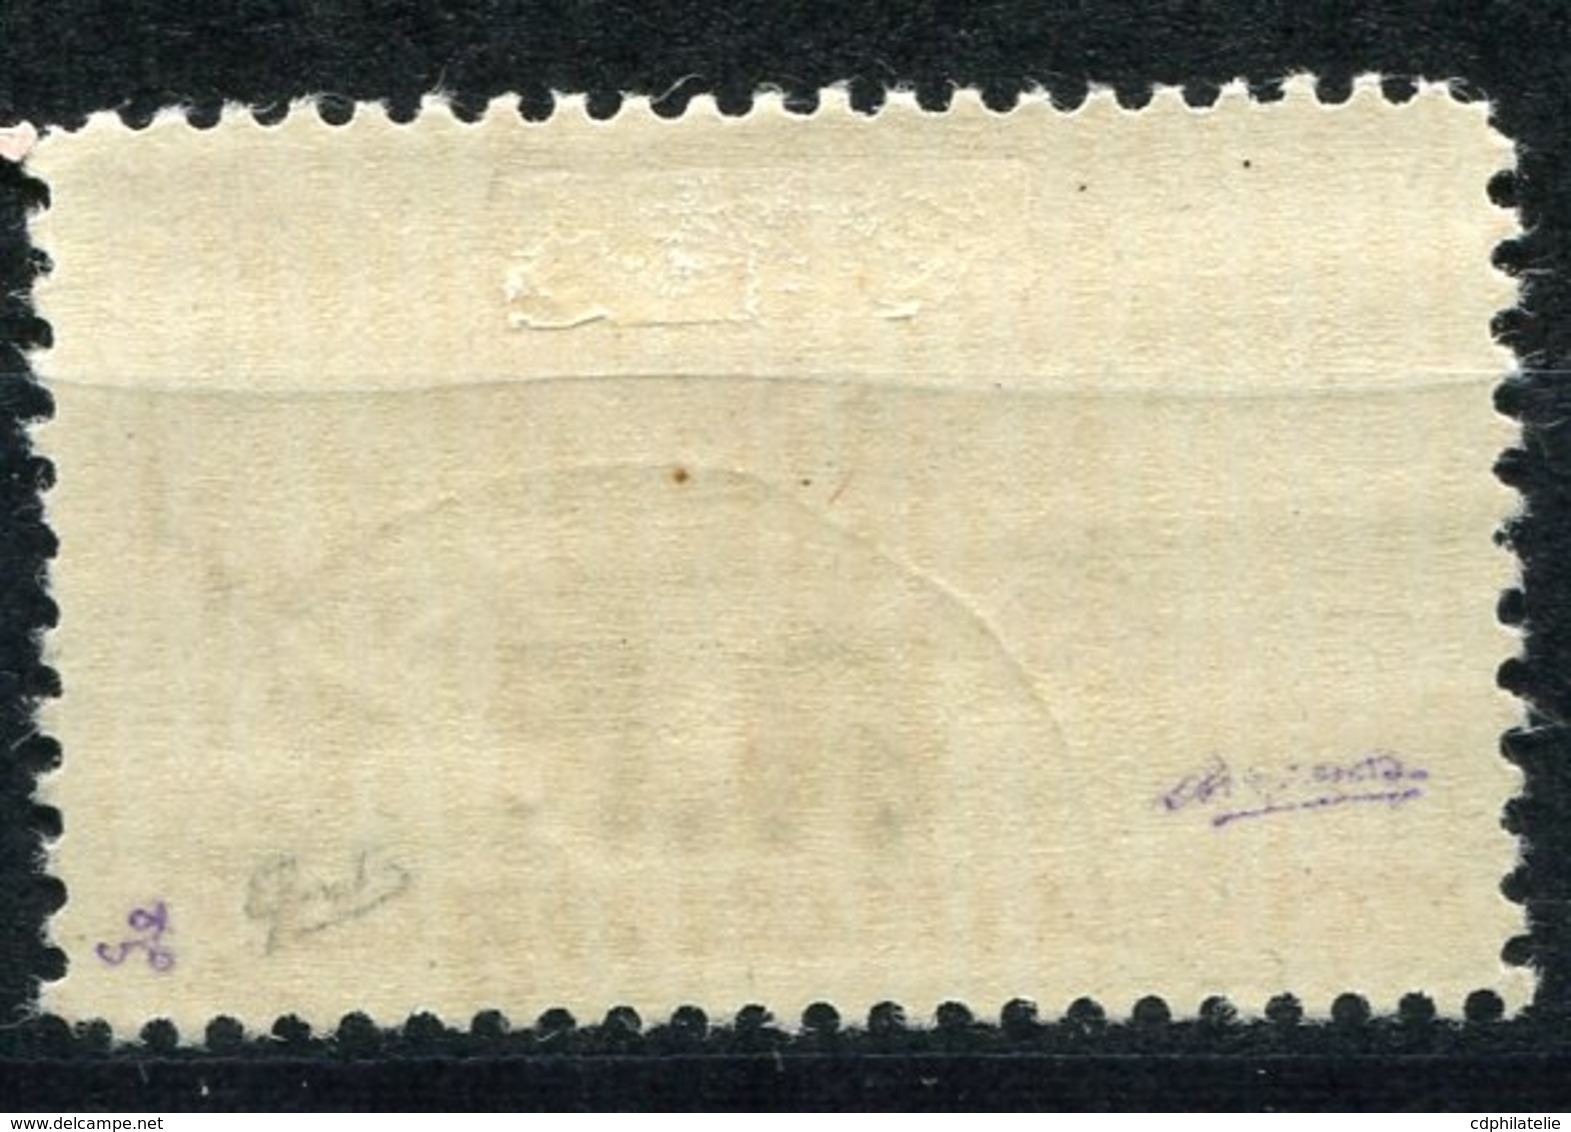 FRANCE POSTE NAVALE LE 6 CENTS U.S.A. SURCHARGE RF (CASABLANCA TYPE II) N°9 OBLITERE SIGNE - Military Airmail